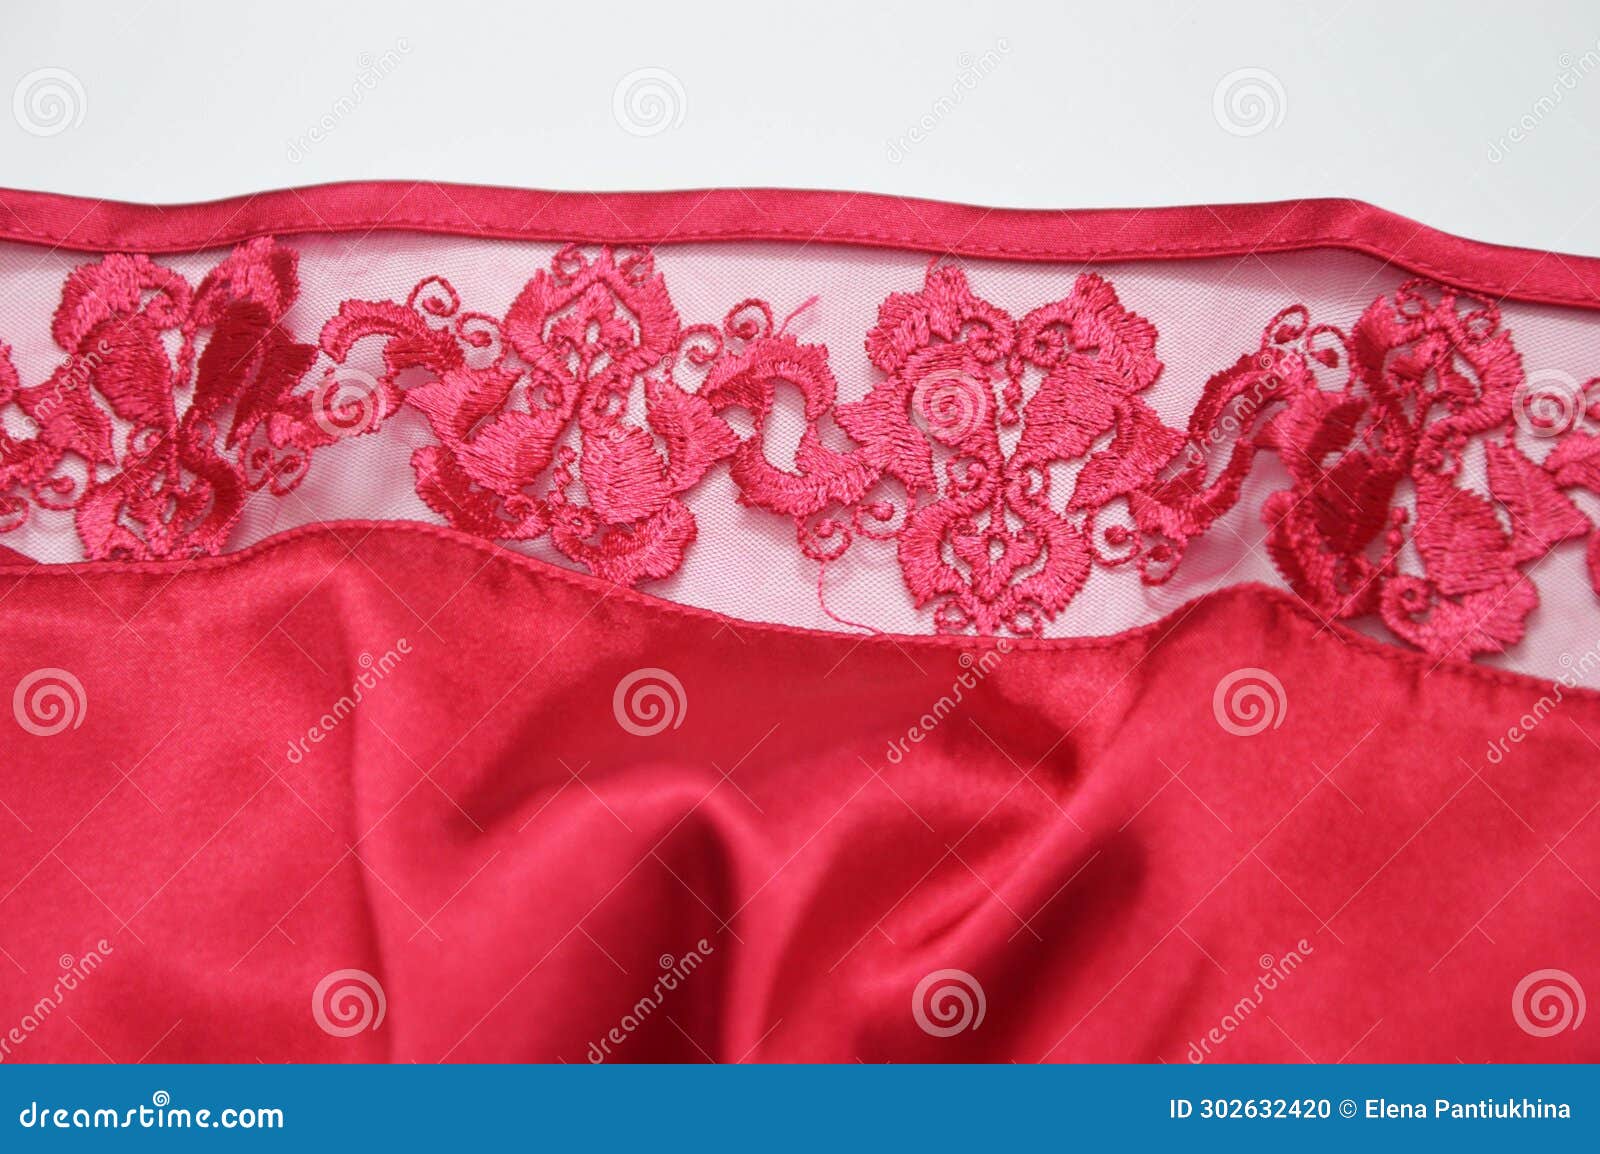 719 Negligee Lingerie Stock Photos - Free & Royalty-Free Stock